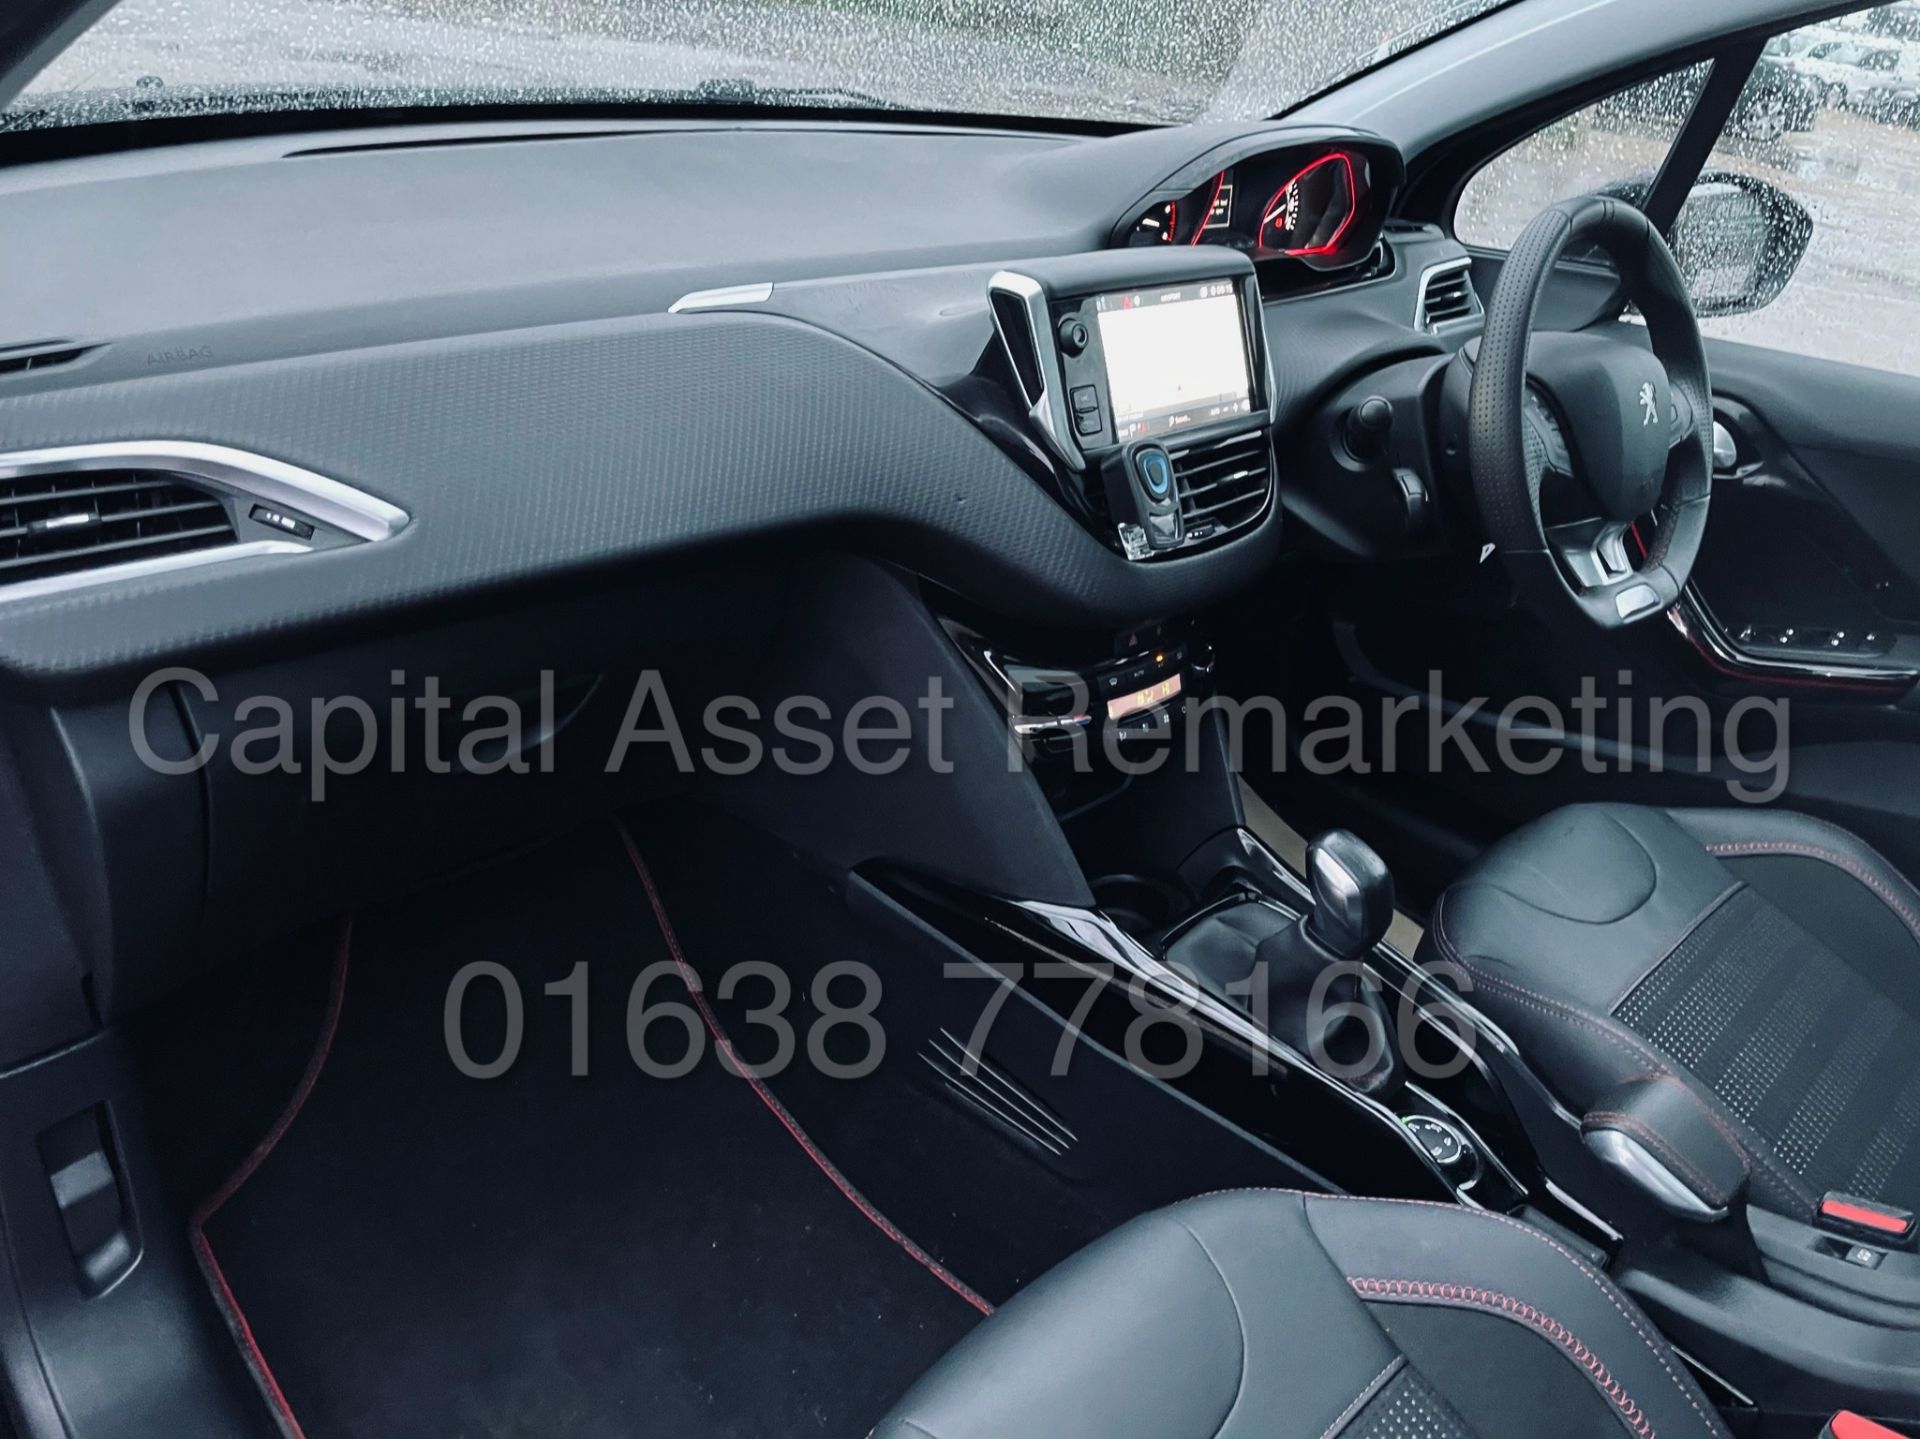 PEUGEOT 2008 *GT LINE* SUV / MPV (2019 - EURO 6) '1.5 BLUE HDI' *SAT NAV - PAN ROOF' *LOW MILES* - Image 18 of 46